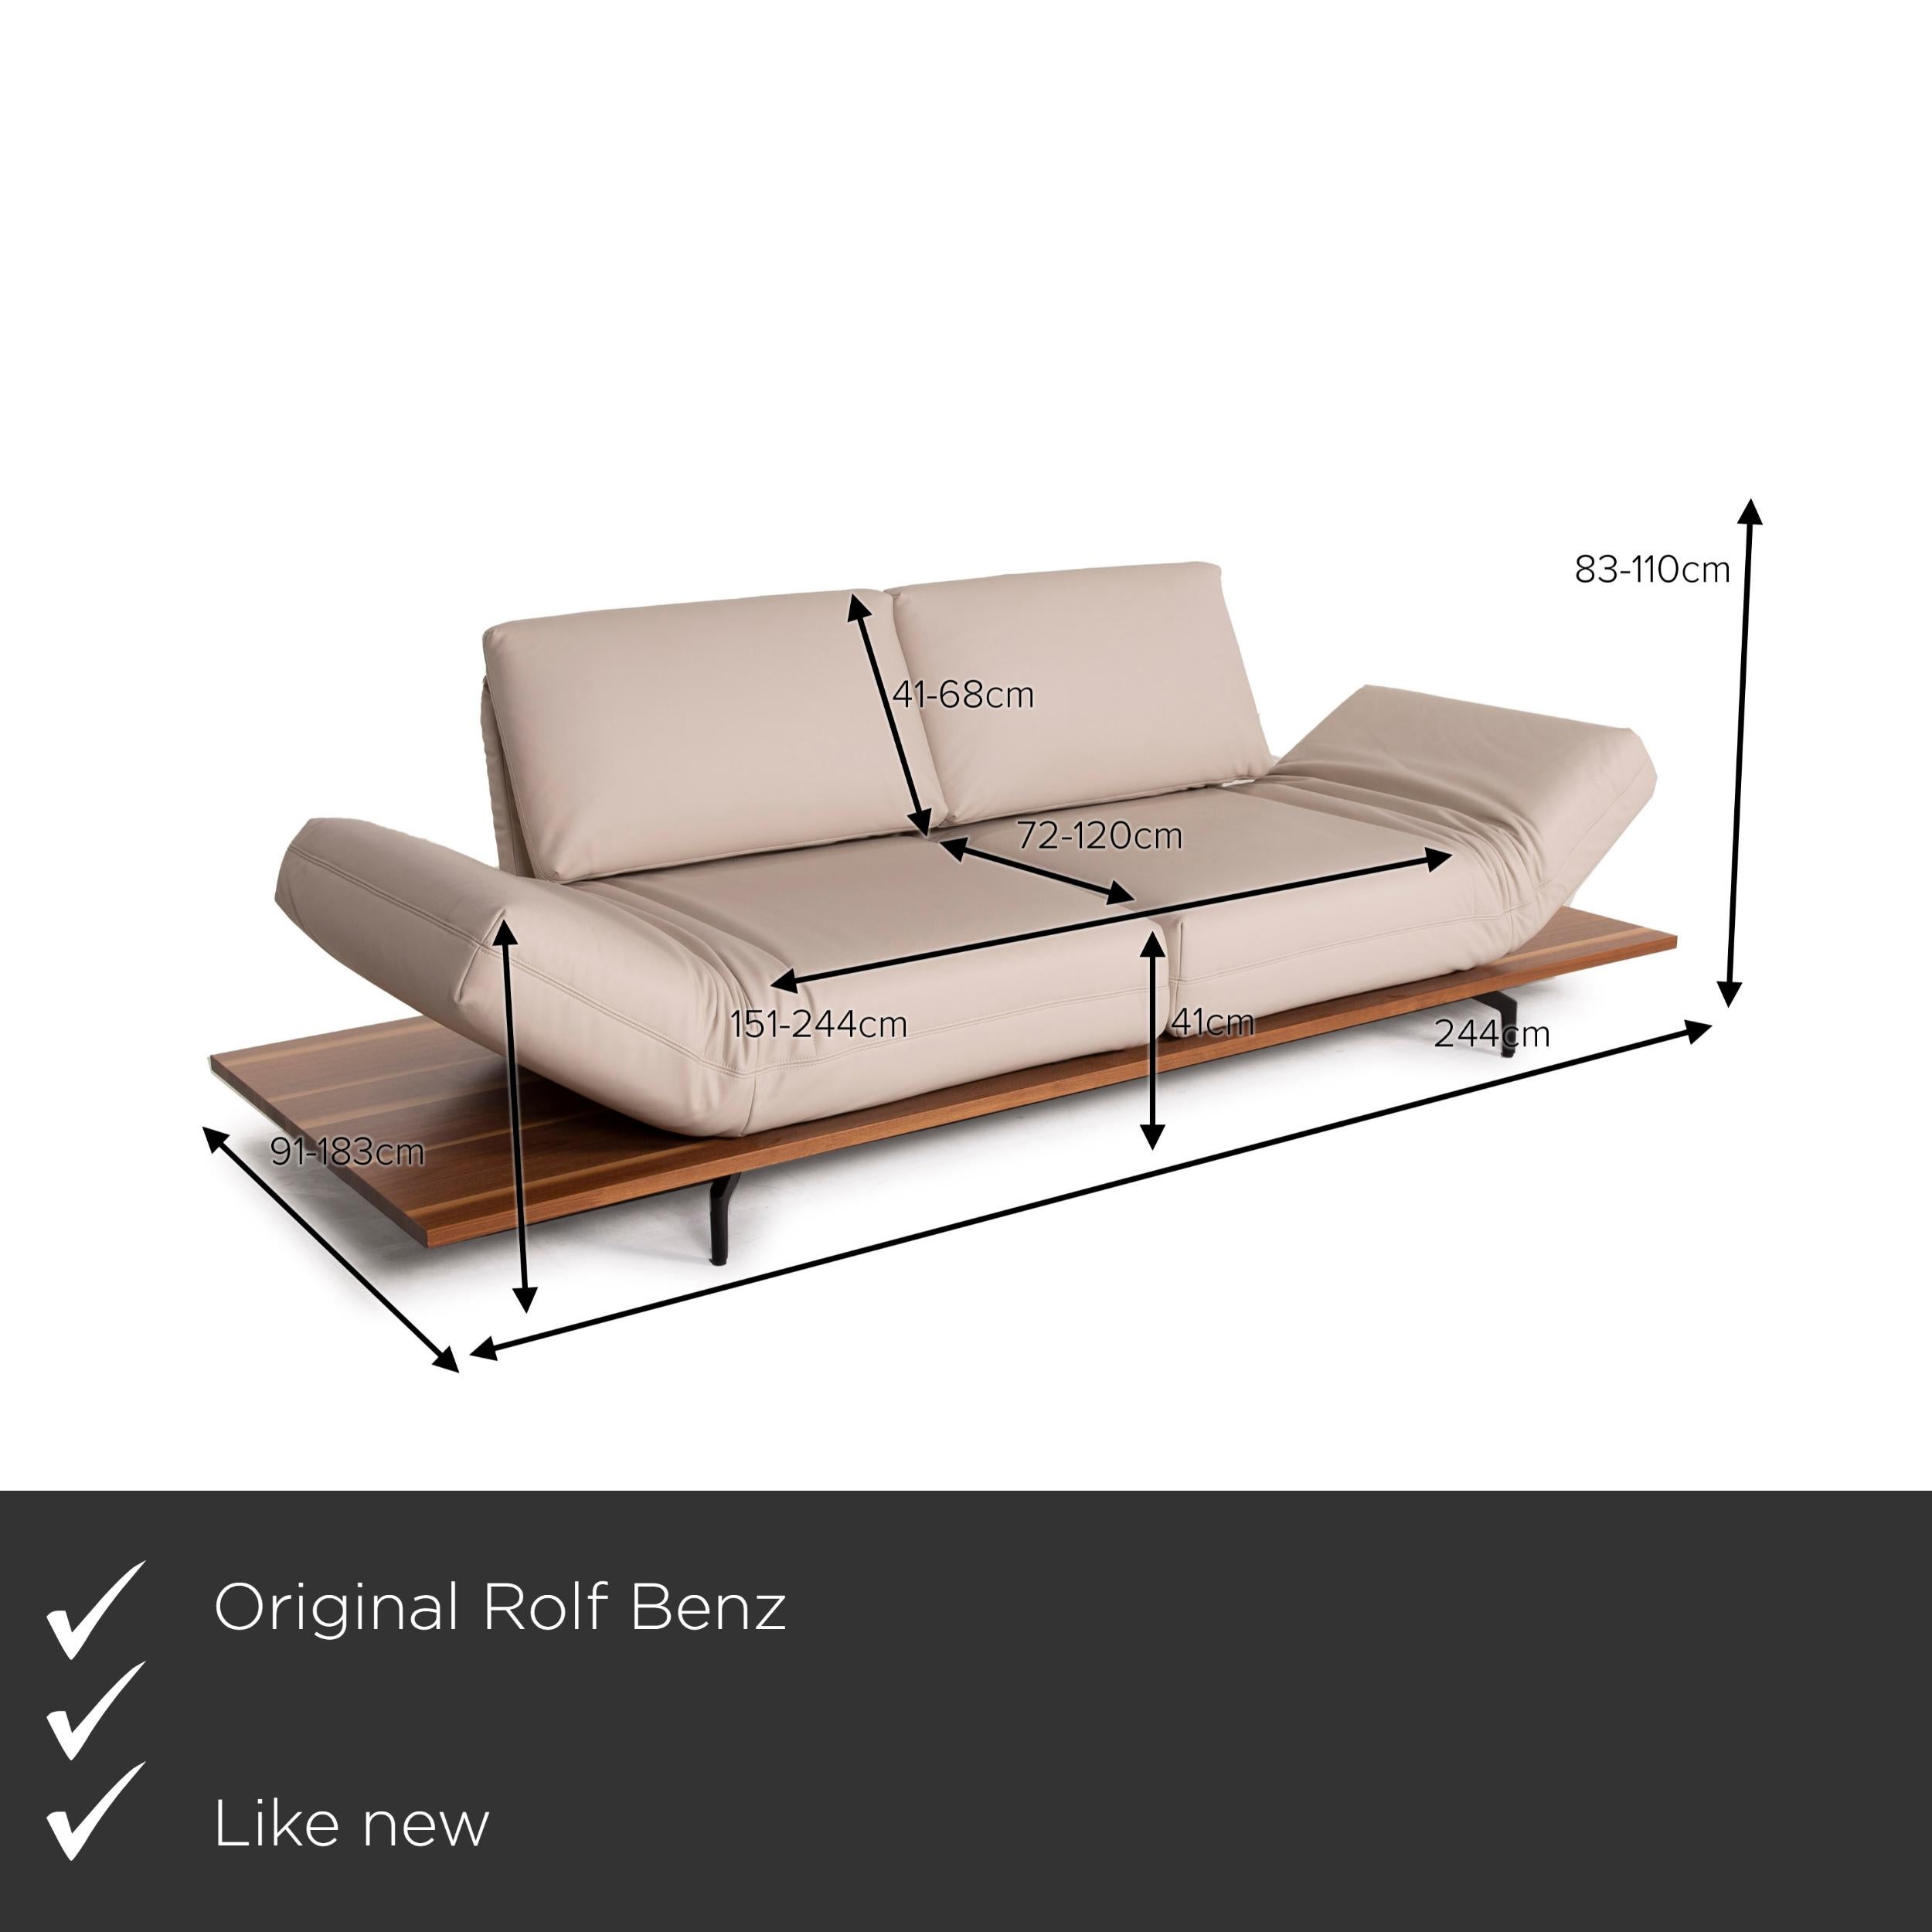 We present to you a Rolf Benz Aura leather sofa cream two-seater function, reclining function, wood.


 Product measurements in centimeters:
 

Depth: 91
Width: 244
Height: 83
Seat height: 41
Rest height: 67
Seat depth: 72
Seat width: